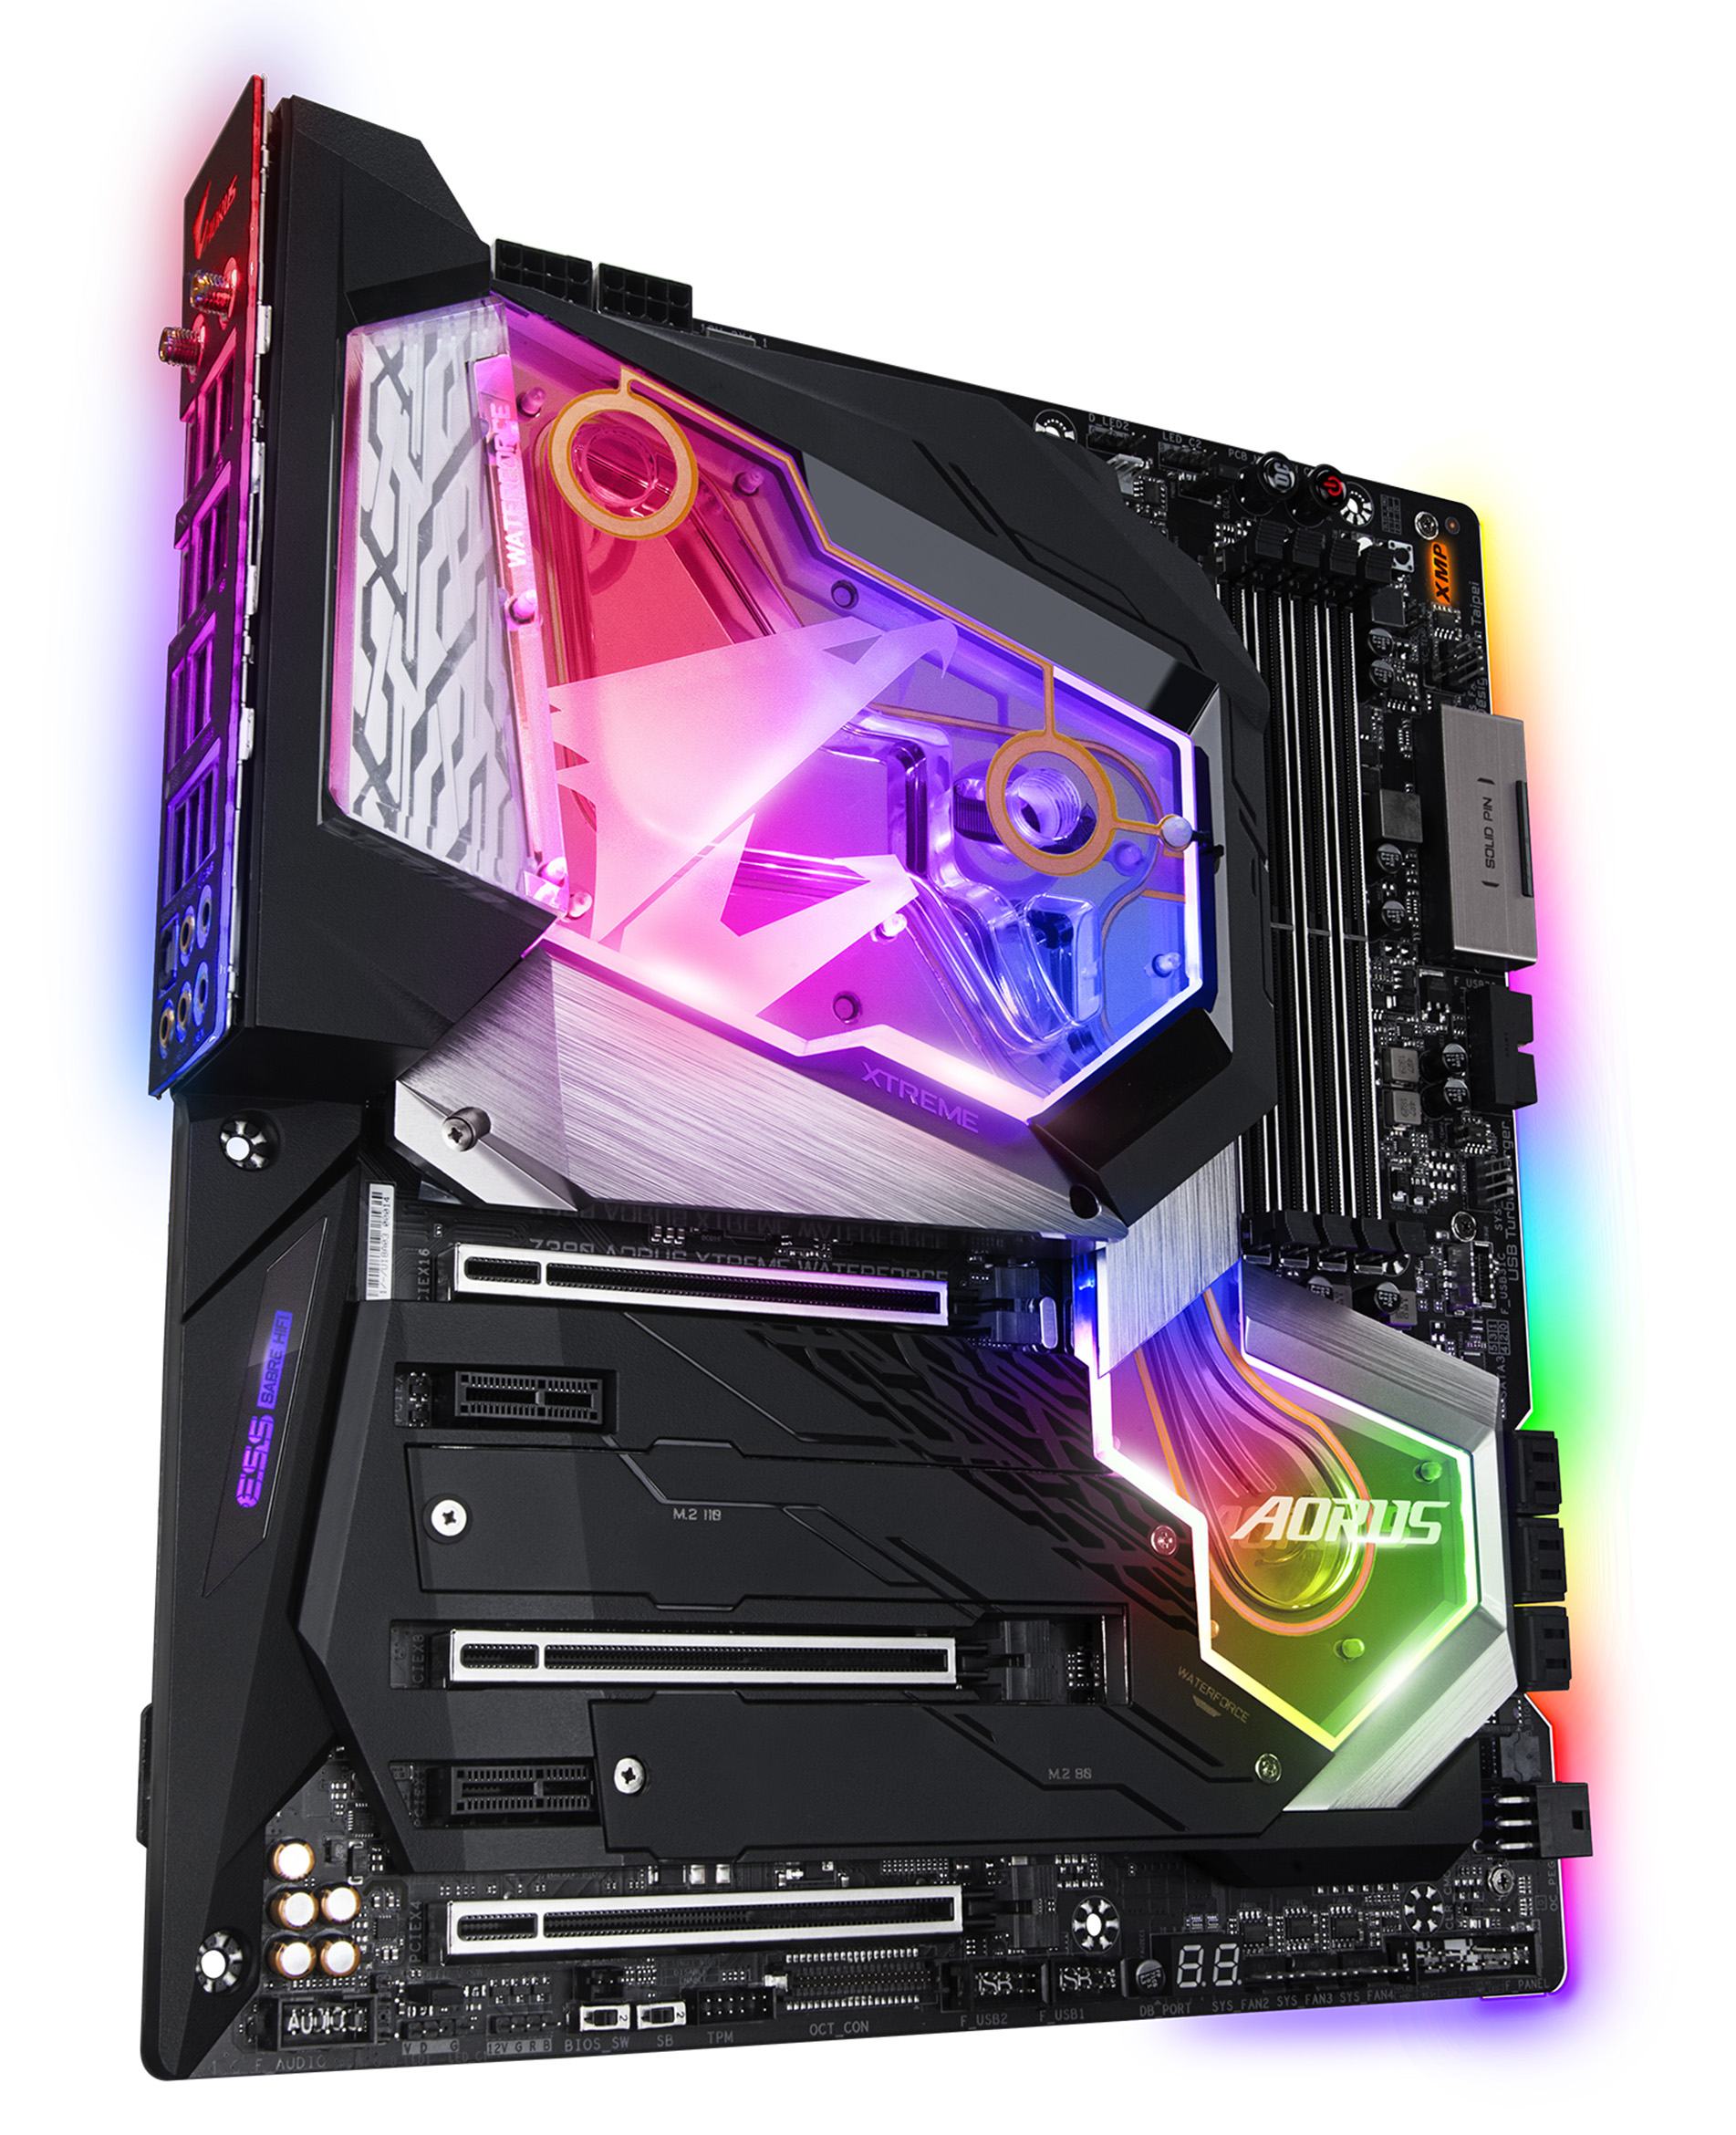 All-in-One Watercooling Gaming Motherboard